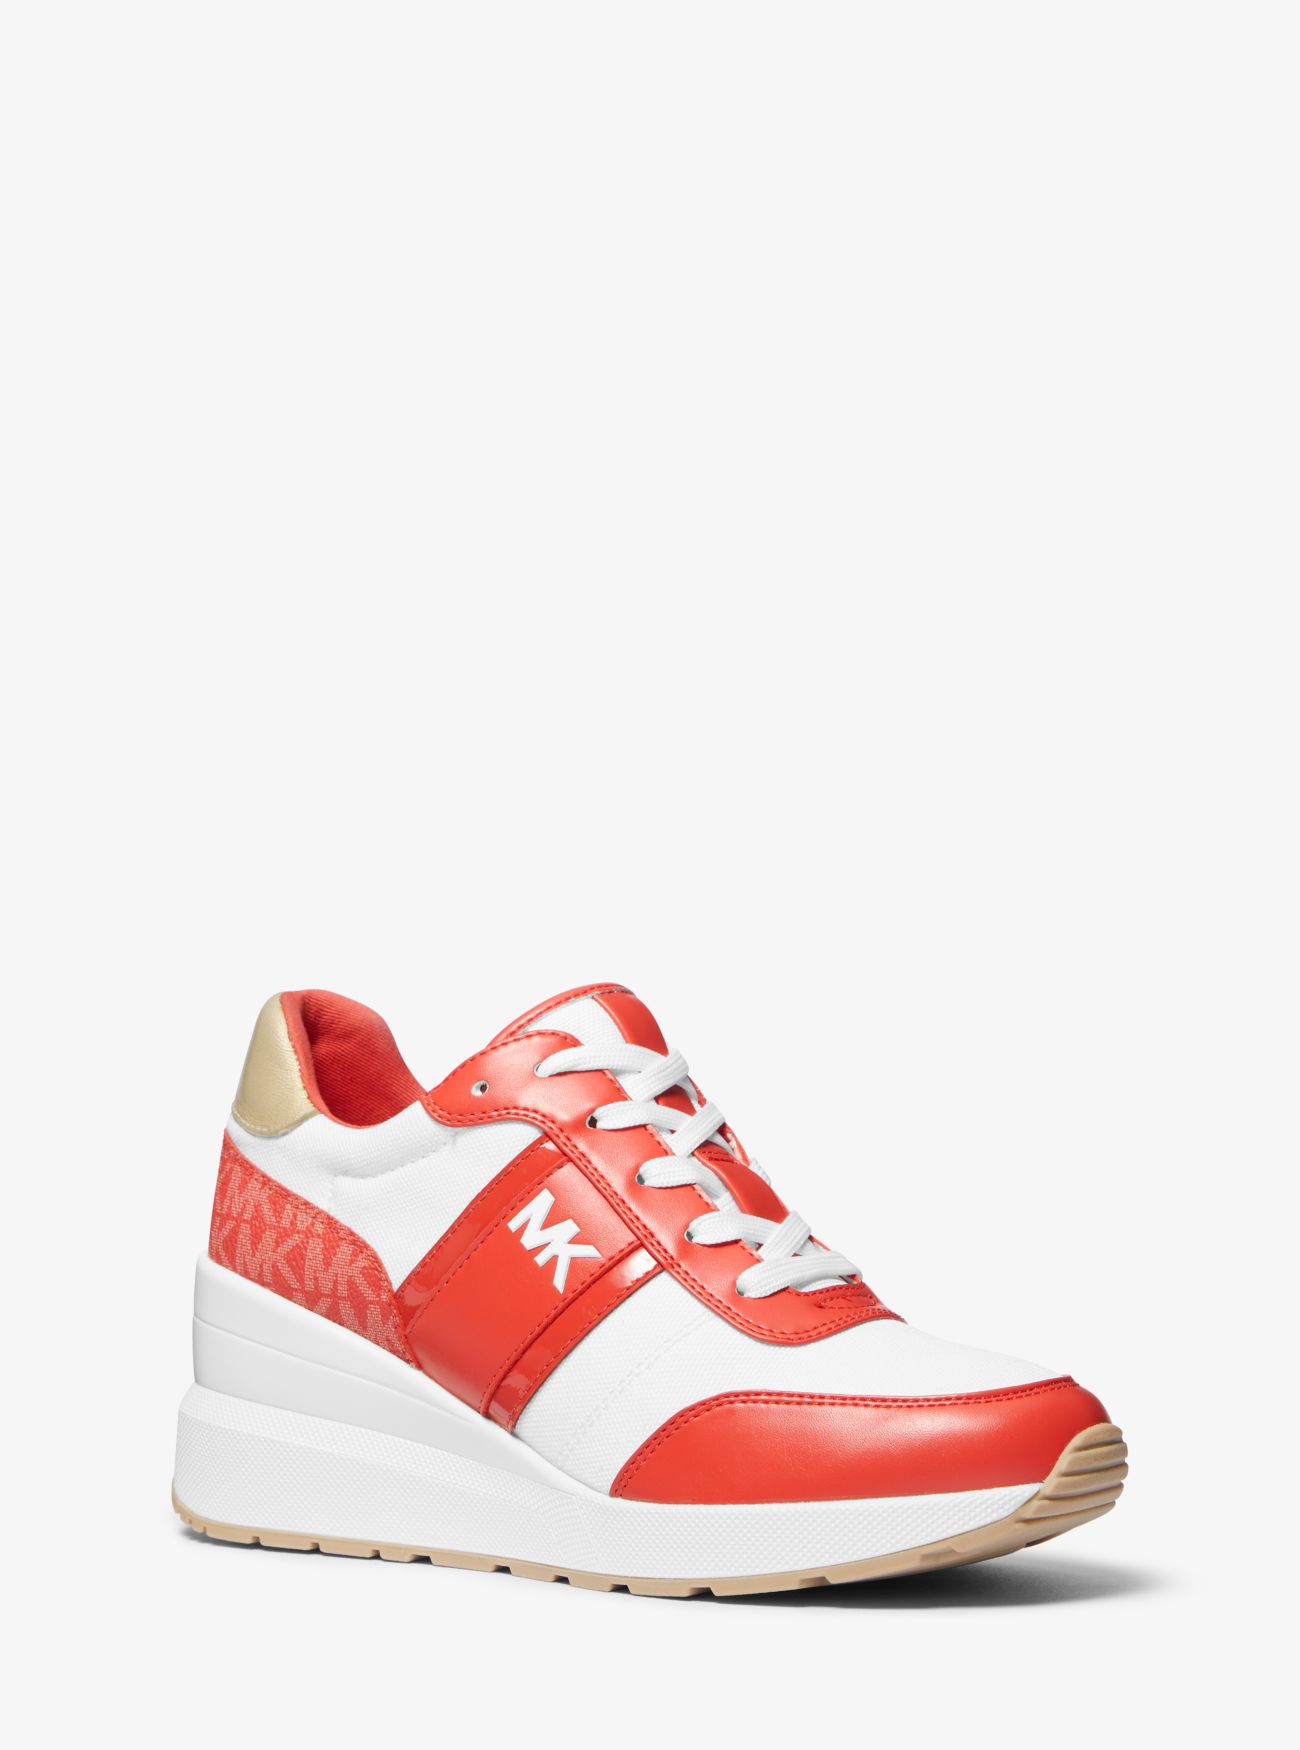 MK Mabel Canvas Trainer - Spiced Coral Multi - Michael Kors